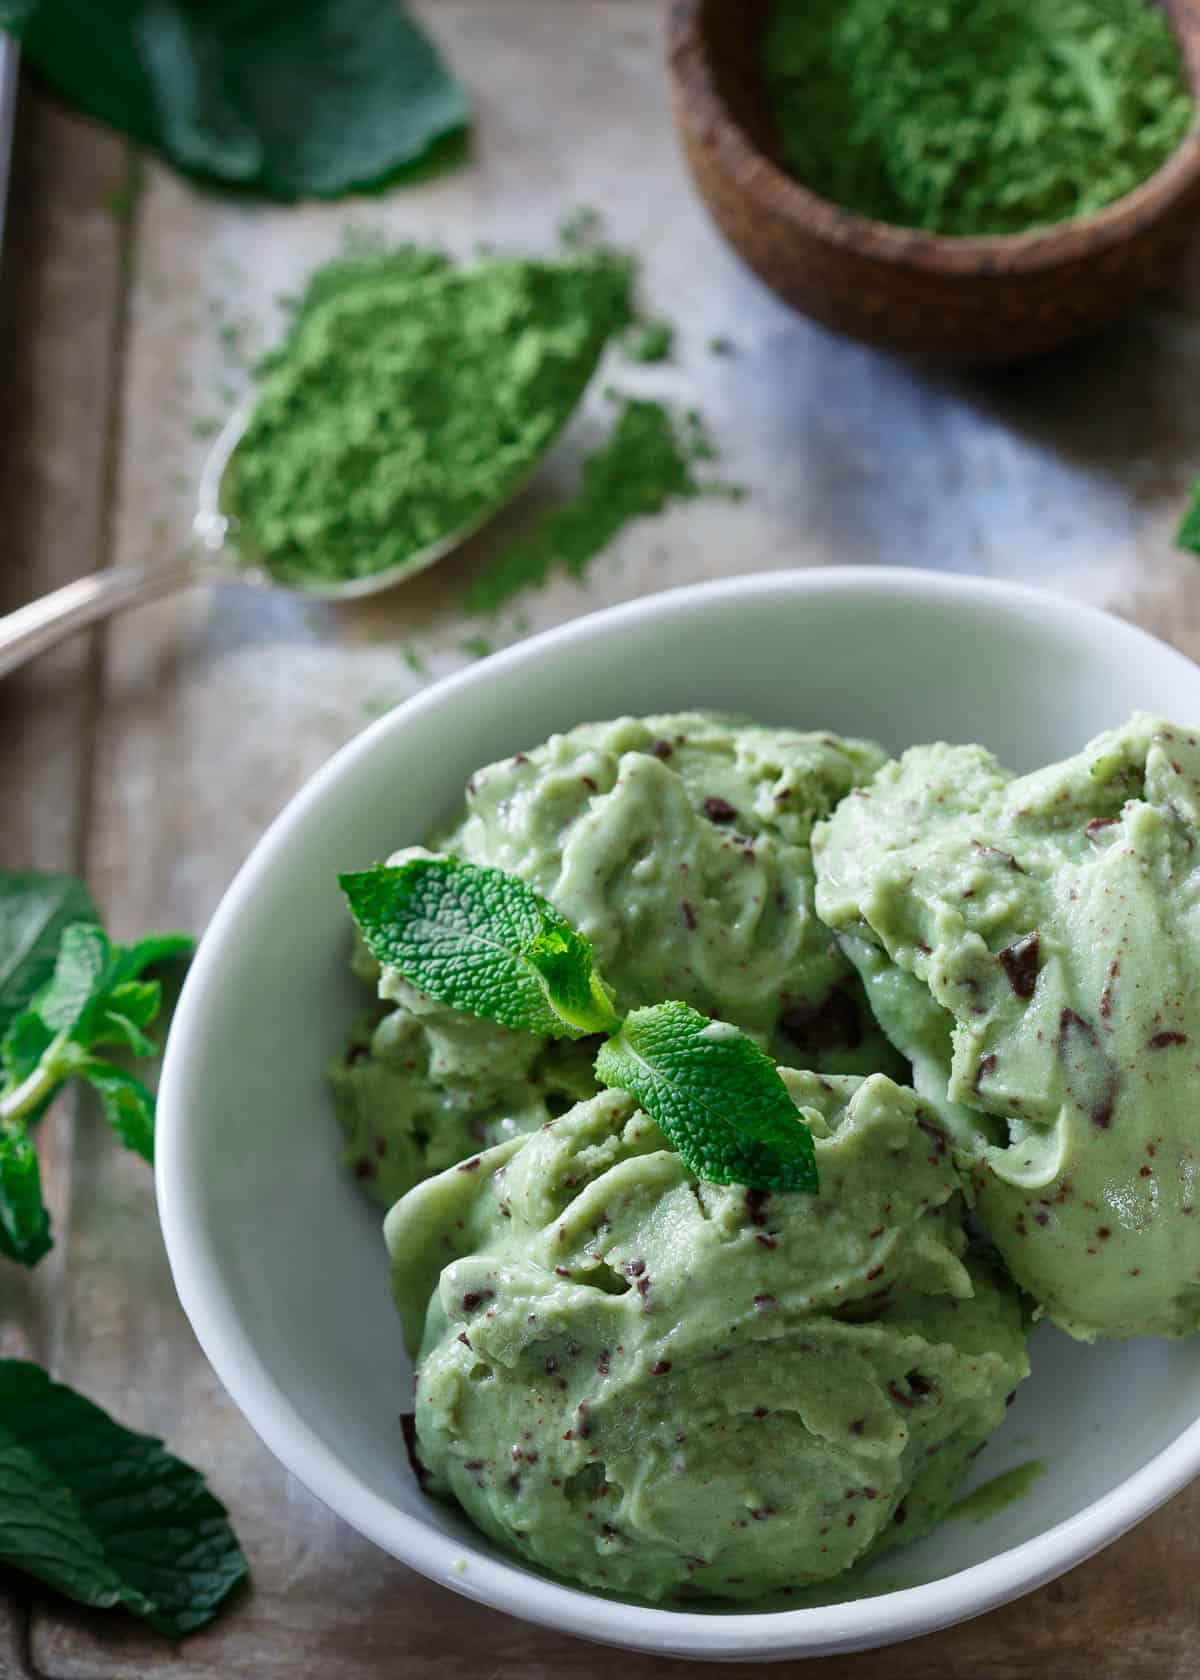 This matcha mint chocolate chunk ice cream is made with coconut milk for a creamy, dairy and gluten free dessert.